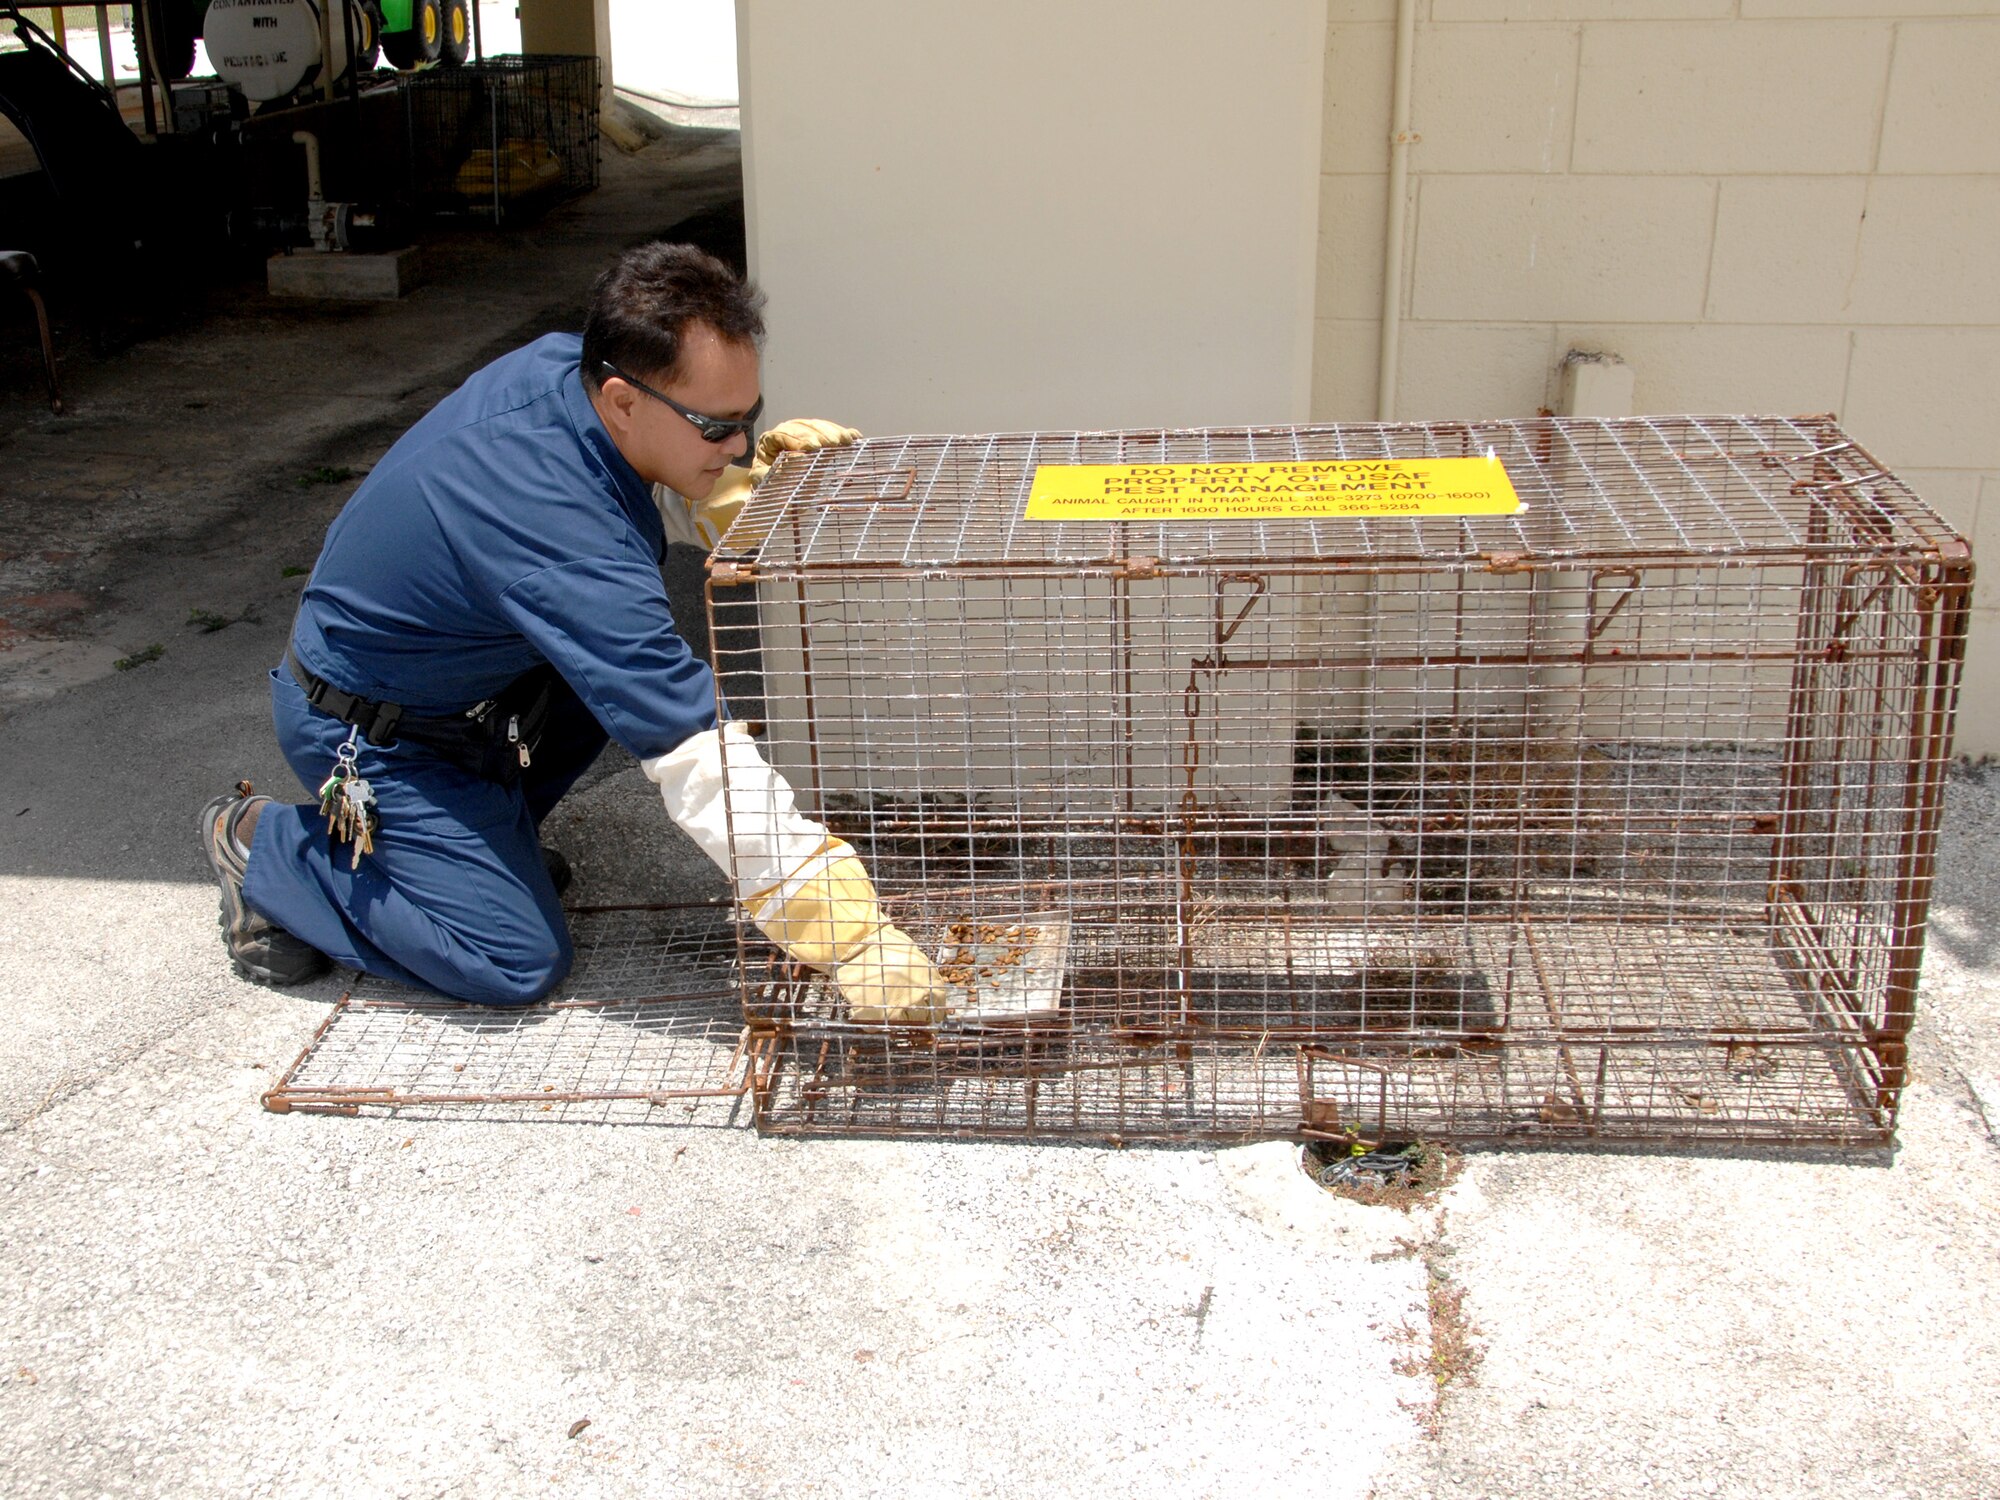 ANDERSEN AIR FORCE BASE, Guam - Jesse B. Chago, a civilian employee with the pest management section here, demonstrates how the animal traps function July 9. The traps are designed to cause no harm to the animals when activated. (U.S. Air Force photo by Airman Whitney Amstutz)